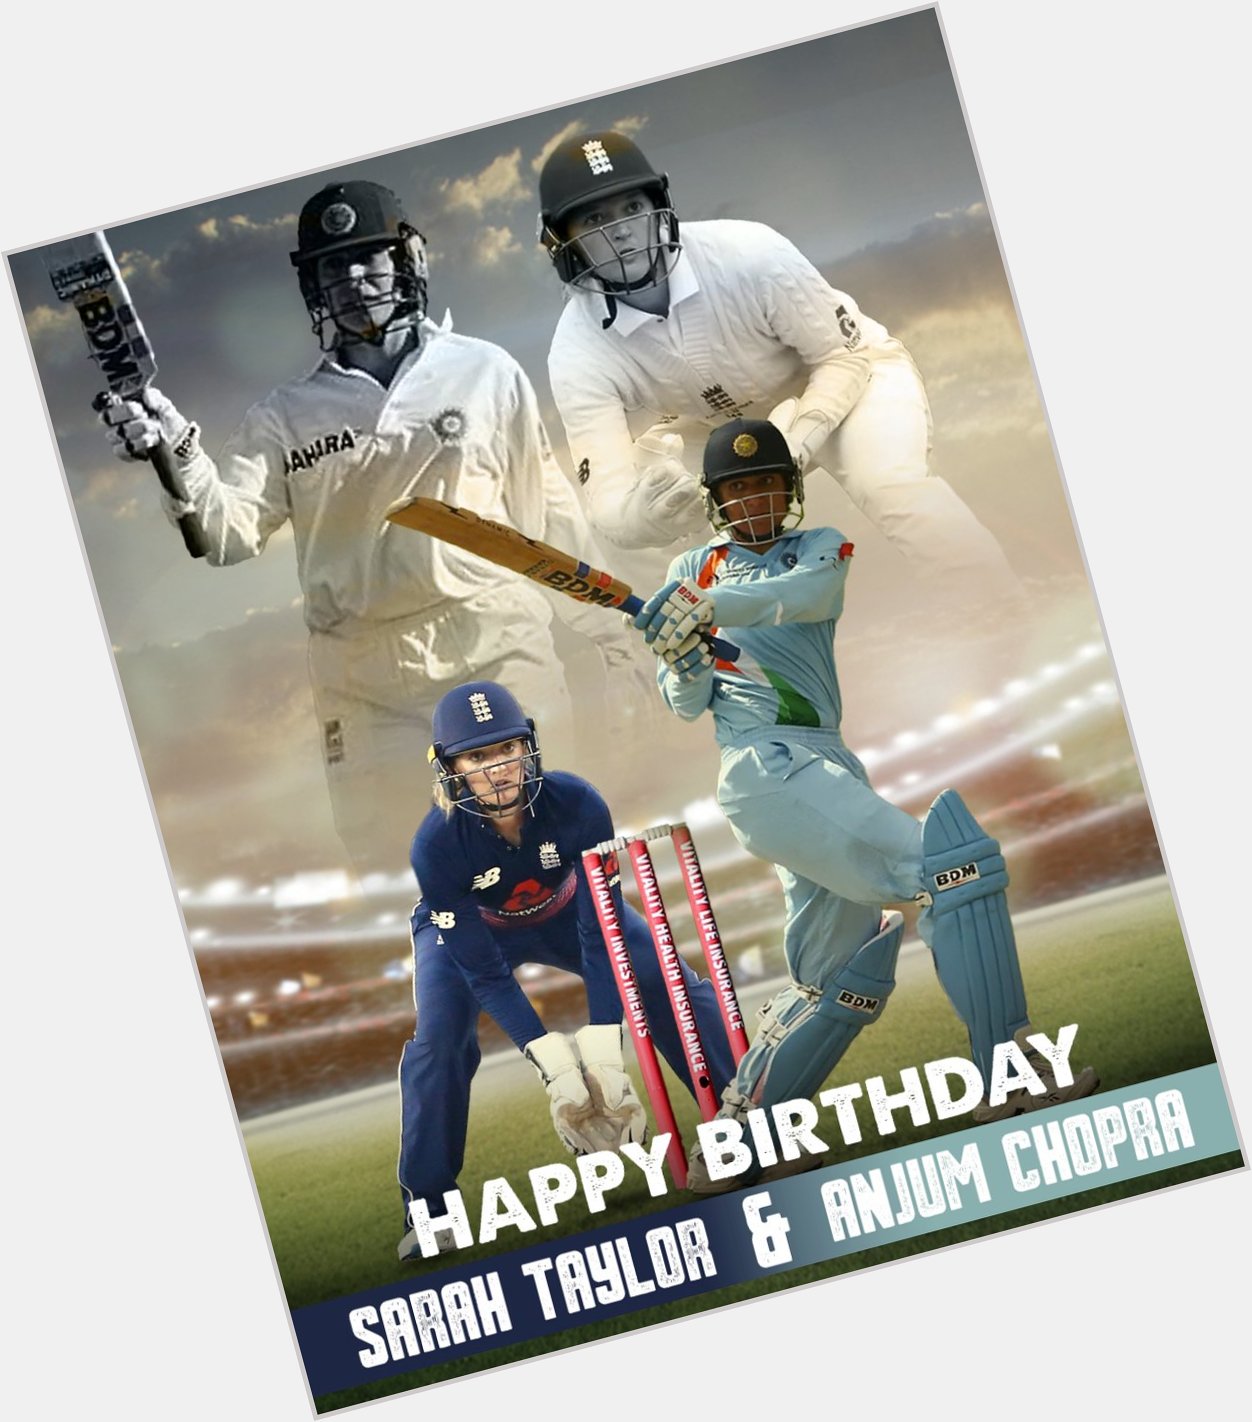 Wishing and Sarah Taylor a very happy birthday! They both are legends of the game.  